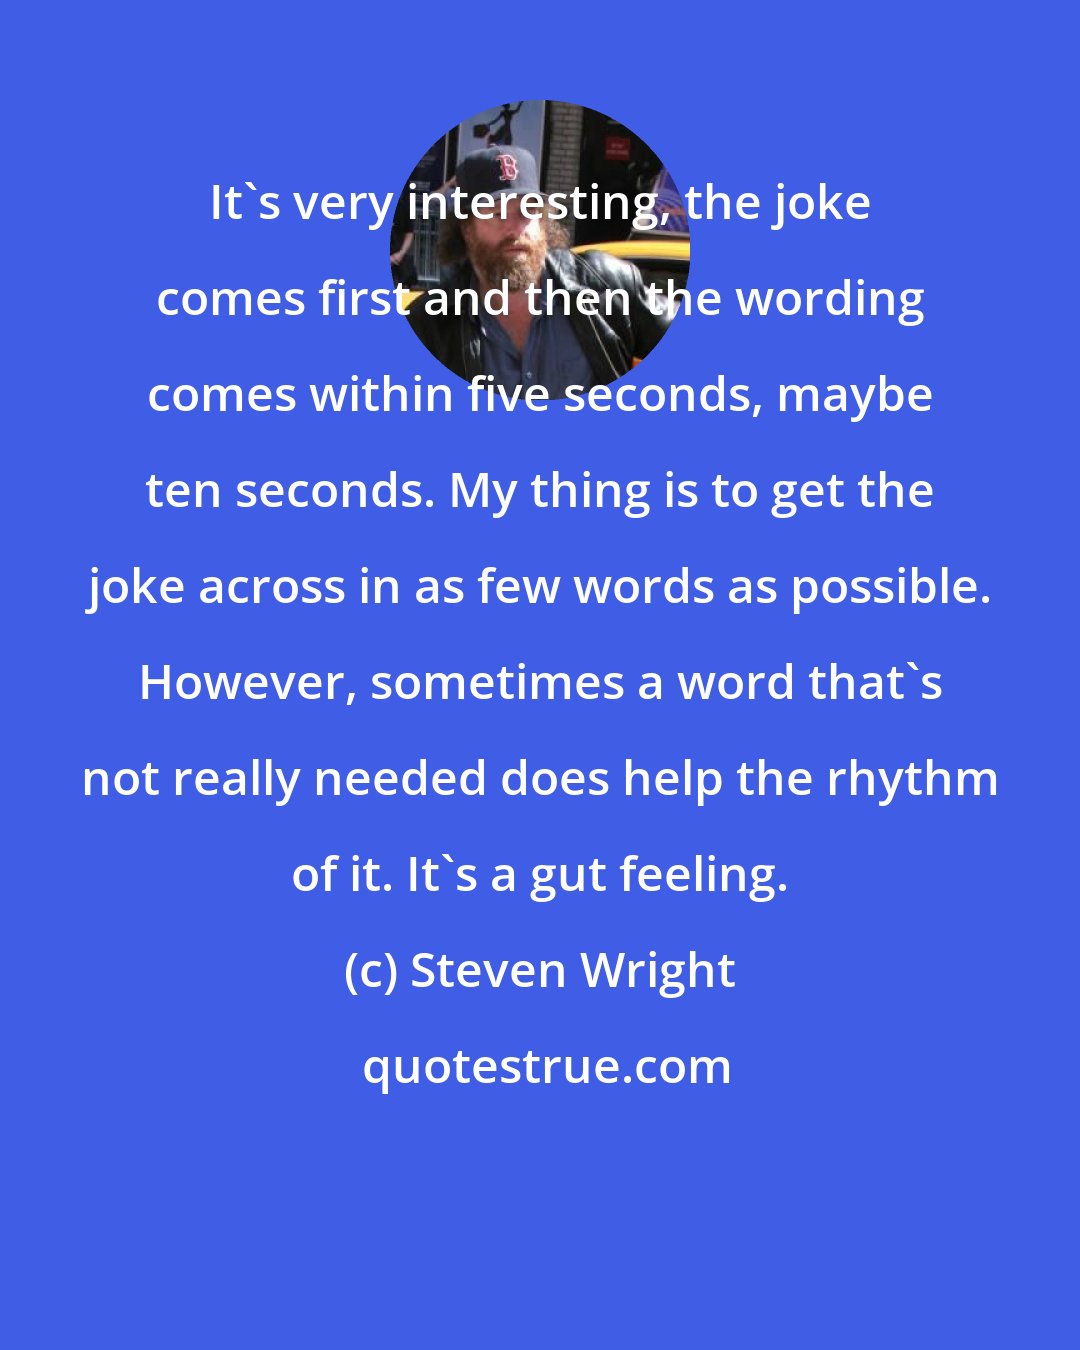 Steven Wright: It's very interesting, the joke comes first and then the wording comes within five seconds, maybe ten seconds. My thing is to get the joke across in as few words as possible. However, sometimes a word that's not really needed does help the rhythm of it. It's a gut feeling.